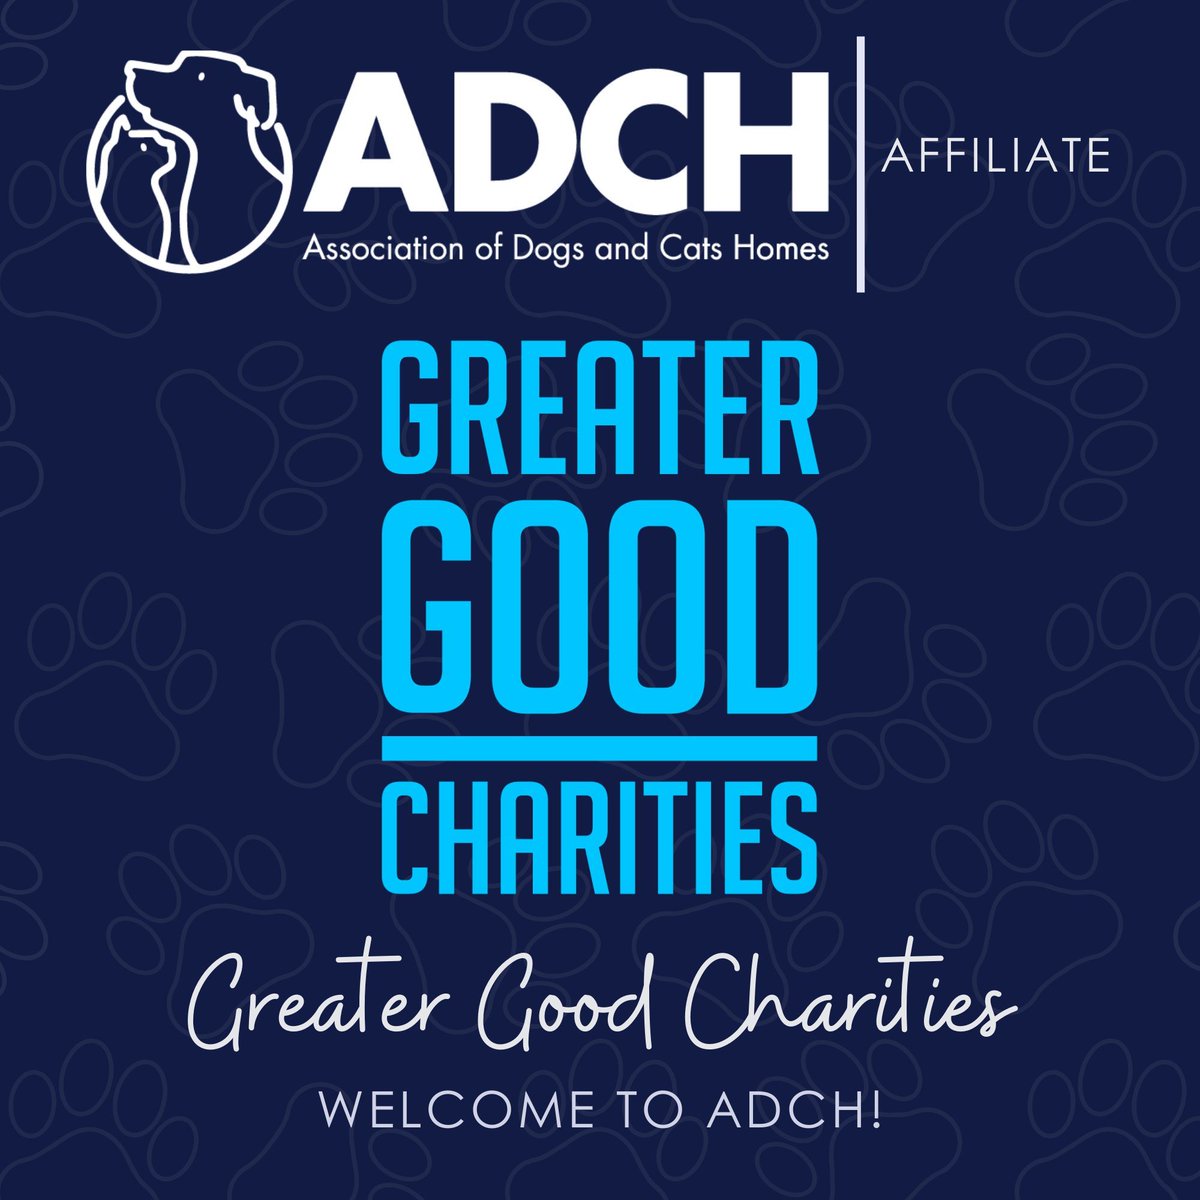 We are delighted to welcome @GreaterGoodorg as a new ADCH Affiliate!🐾🎊 Learn more about them and what they do➡️ buff.ly/2uOAeF4